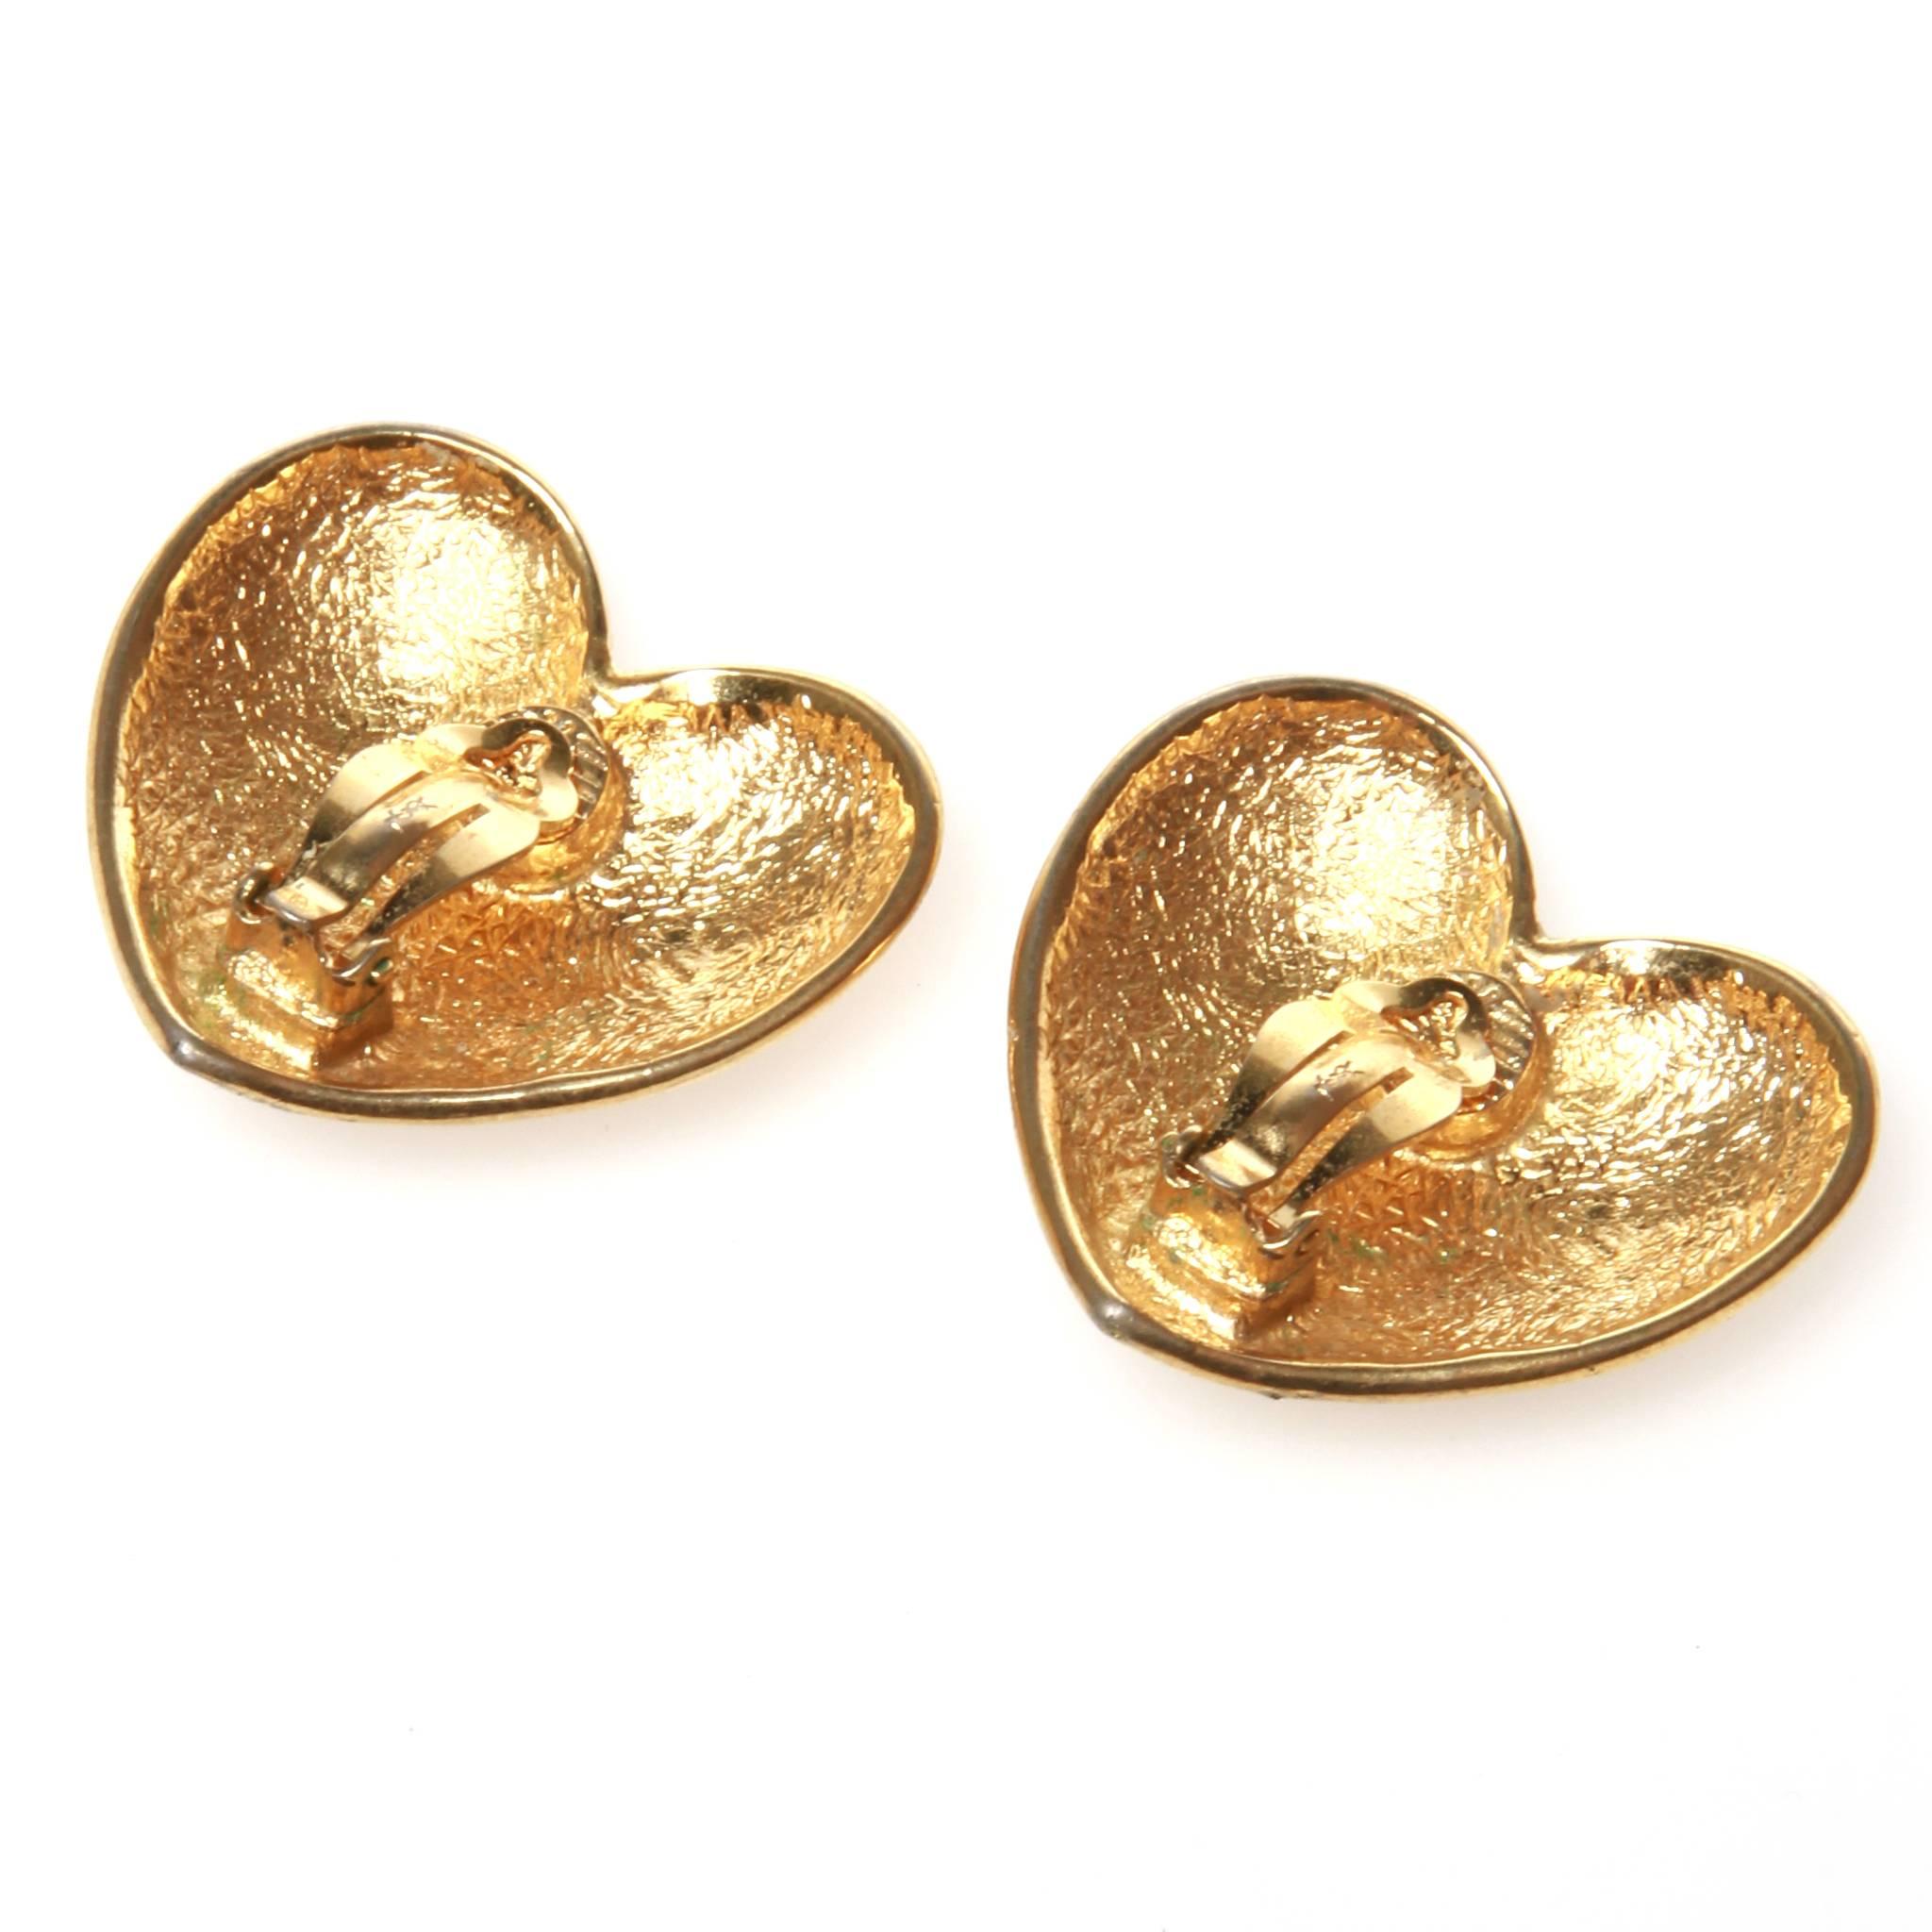 Vintage Saint Laurent YSL clip on earrings featuring a simple love heart design in shiny gold-tone metal. 